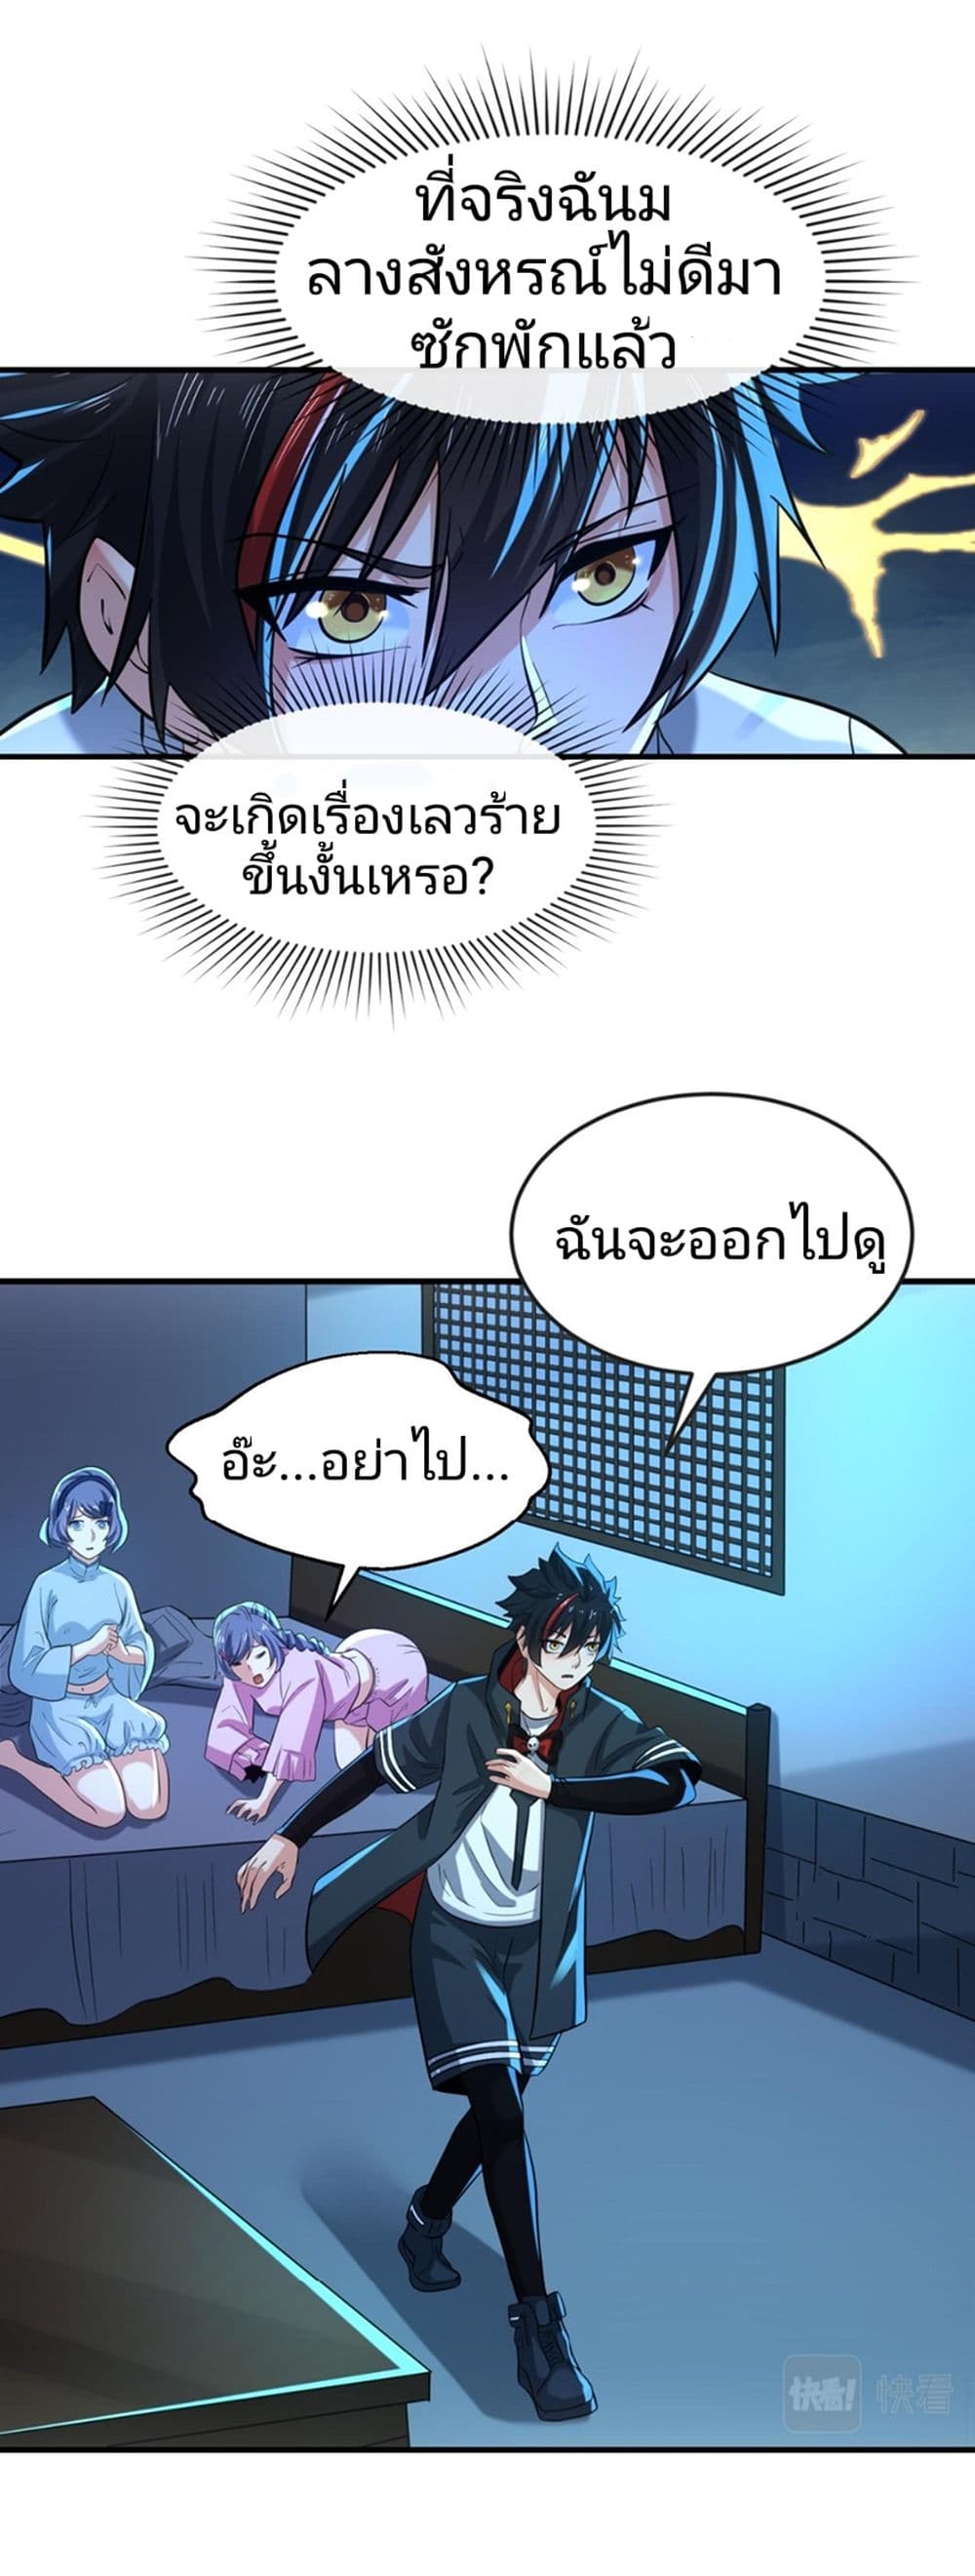 The Age of Ghost Spirits à¸à¸­à¸à¸à¸µà¹ 47 (27)